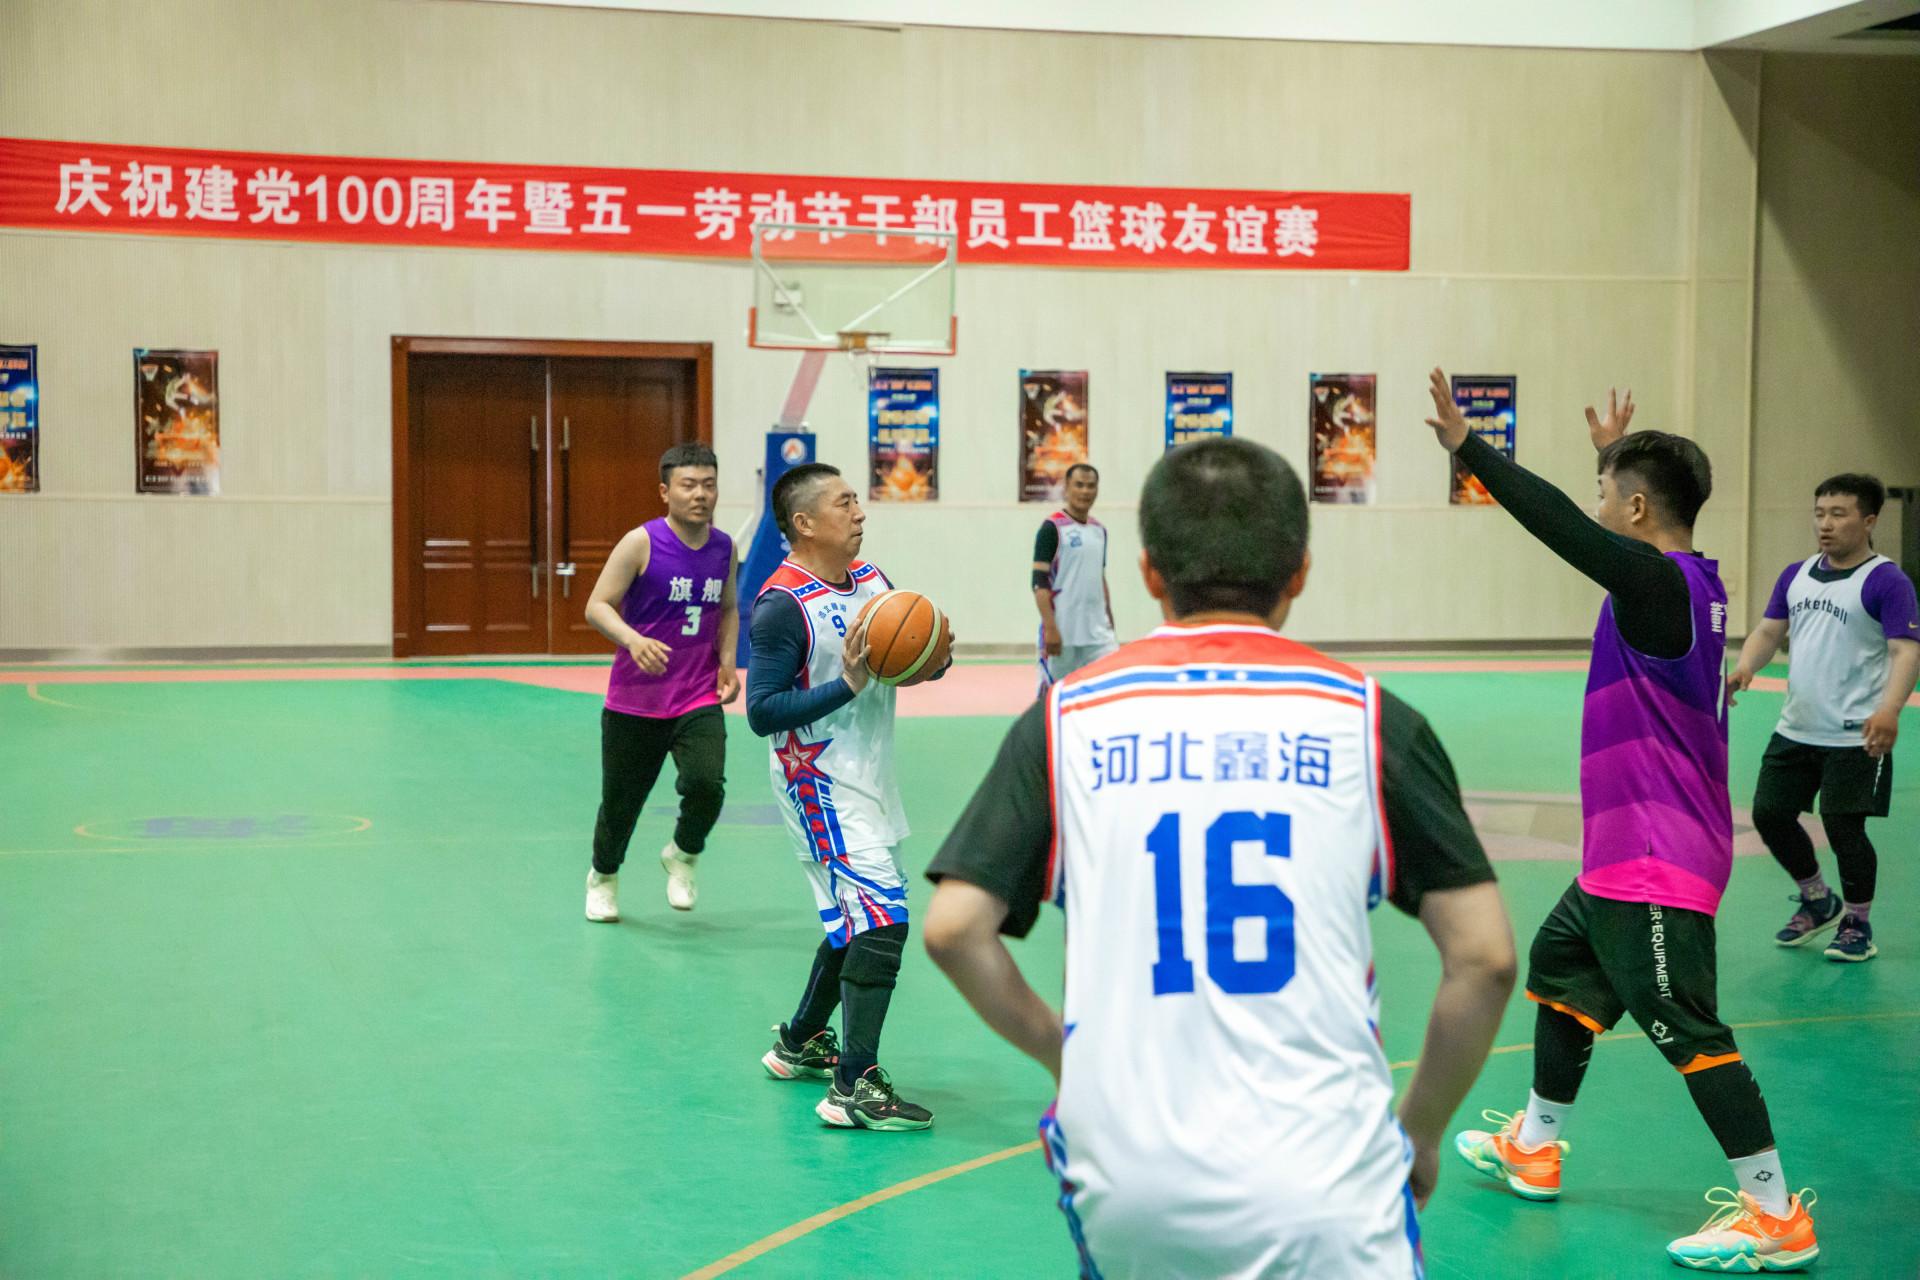 To celebrate the 100 anniversary of the founding of the party, Xinhai Holding Group launched a friendly basketball match for cadres and employees on May 1 Labor Day.